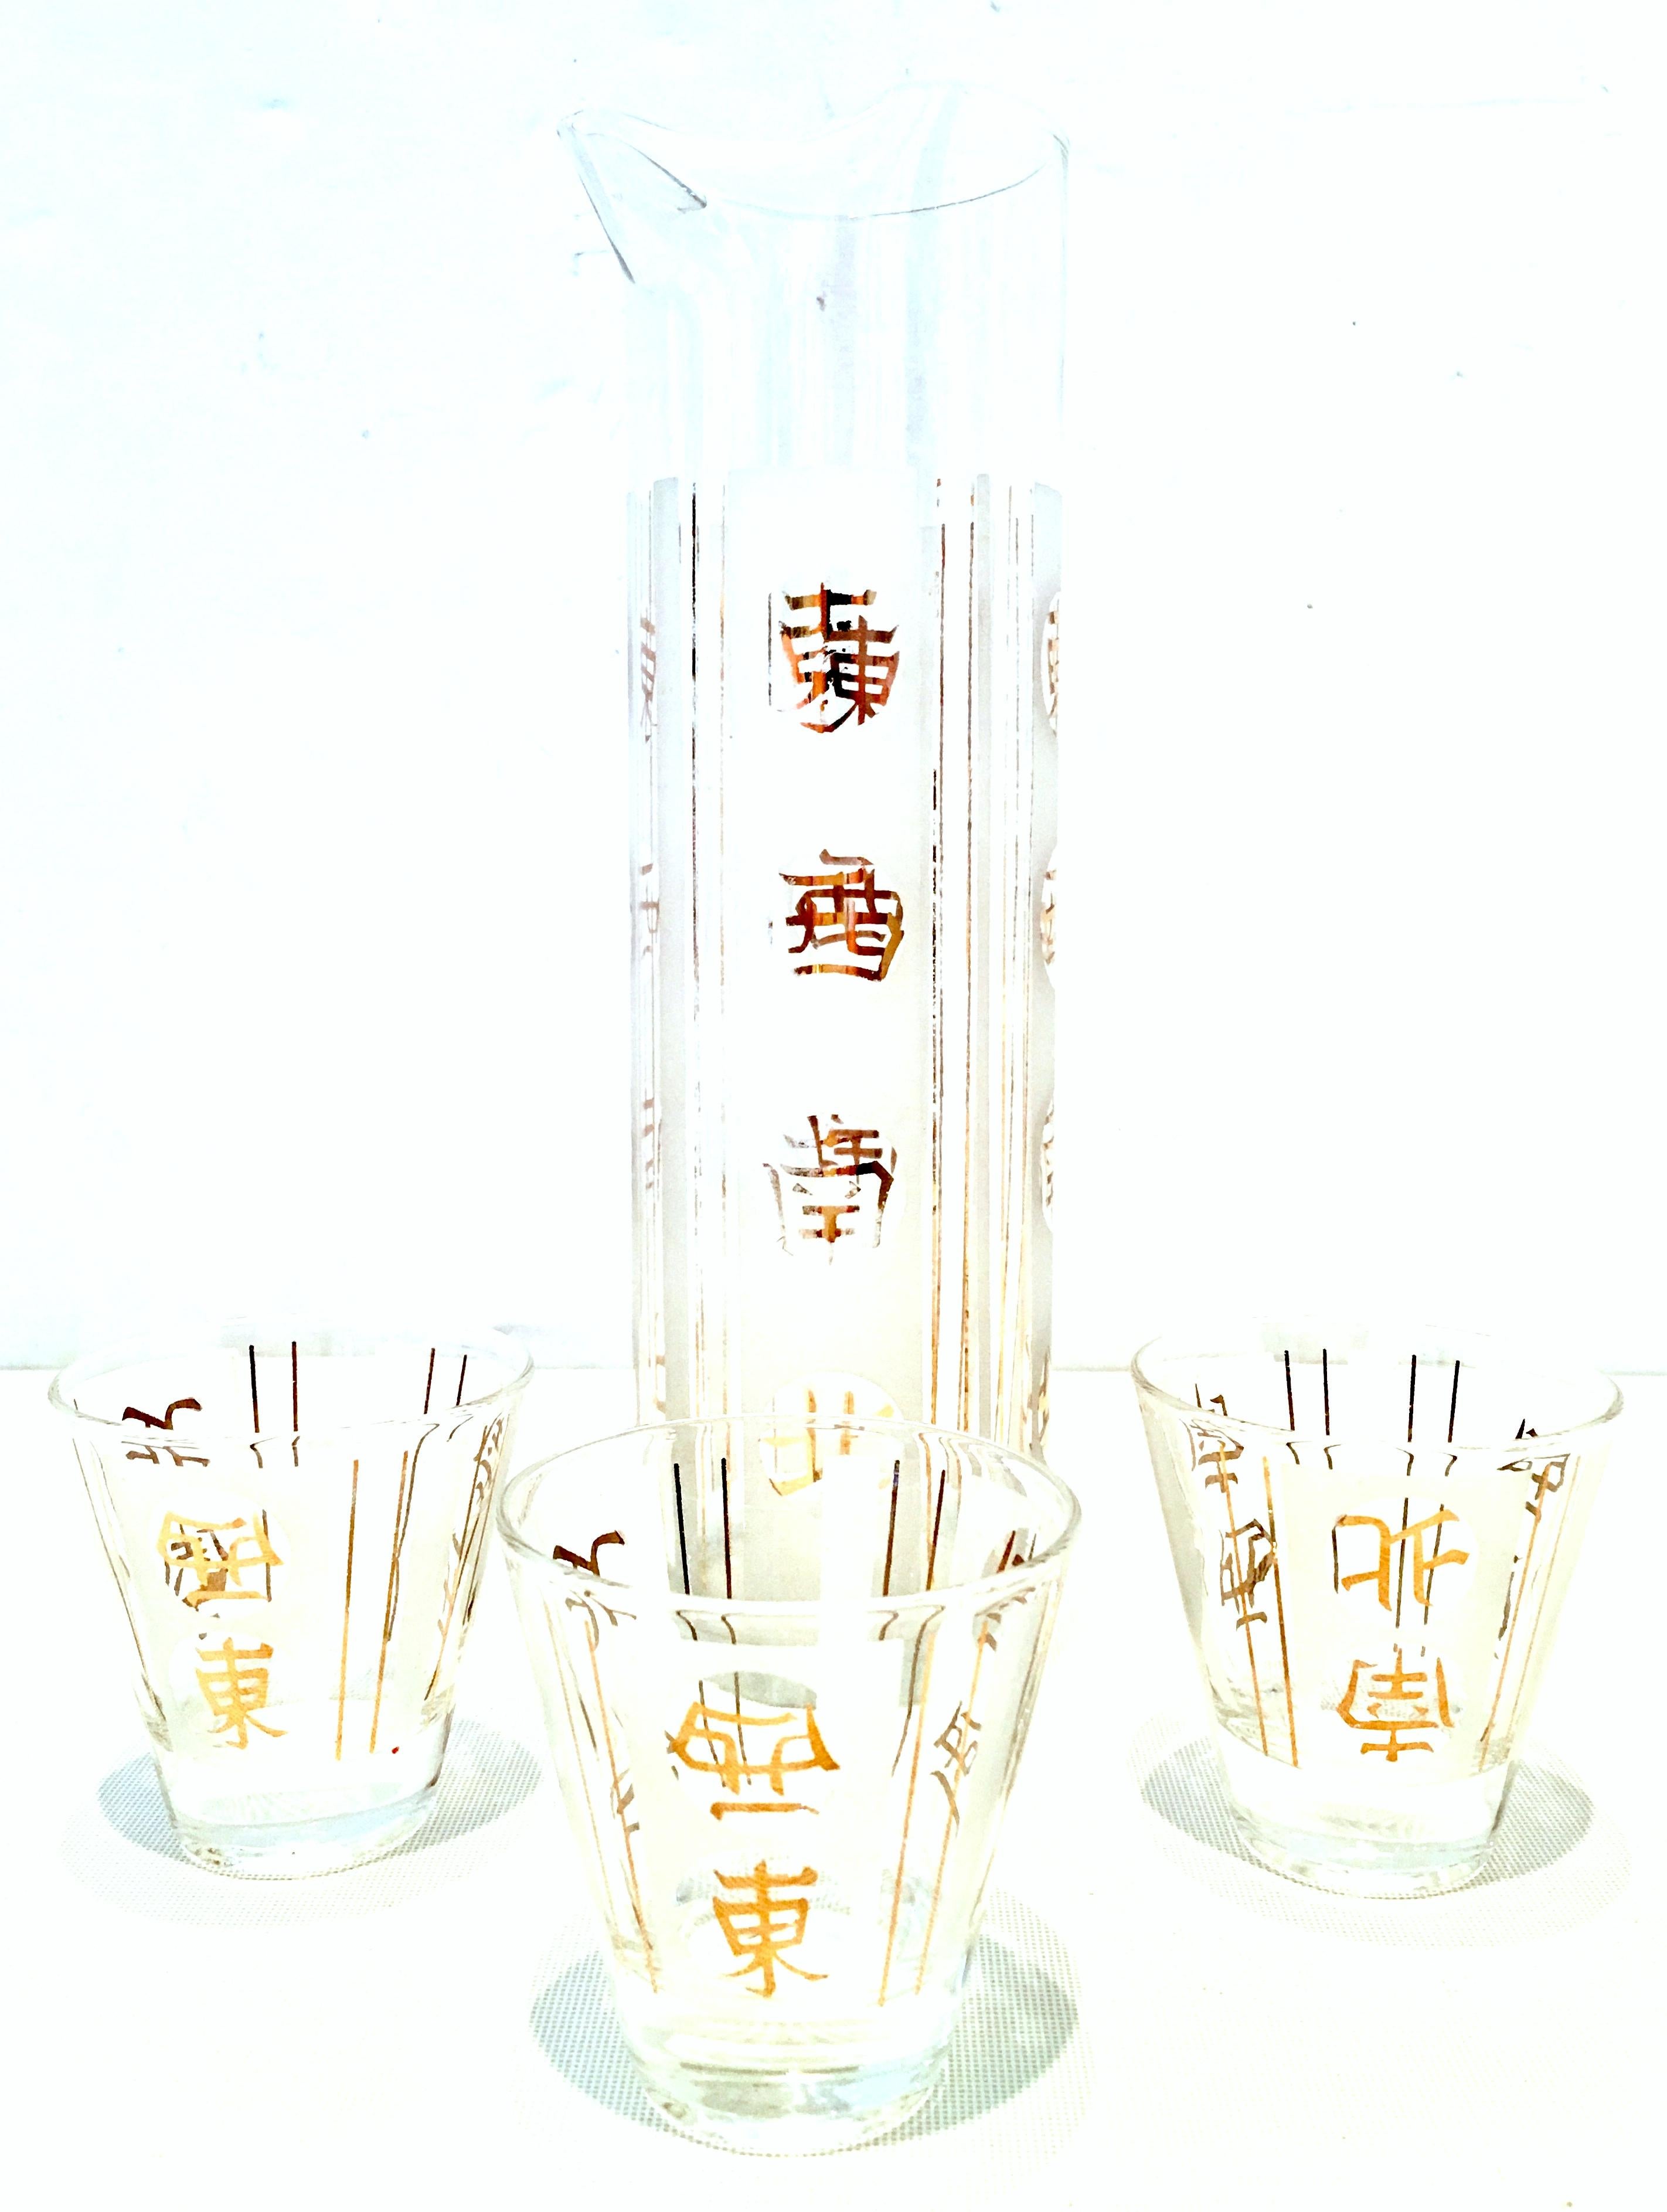 Mid-20th century blown glass and 22-karat gold Chinese symbol drinks set of four pieces. Features translucent and white frosted body with 22-karat gold Chinese symbol detail. Set includes 1 spouted drinks server and 3 shot glasses.
Measures: Shot